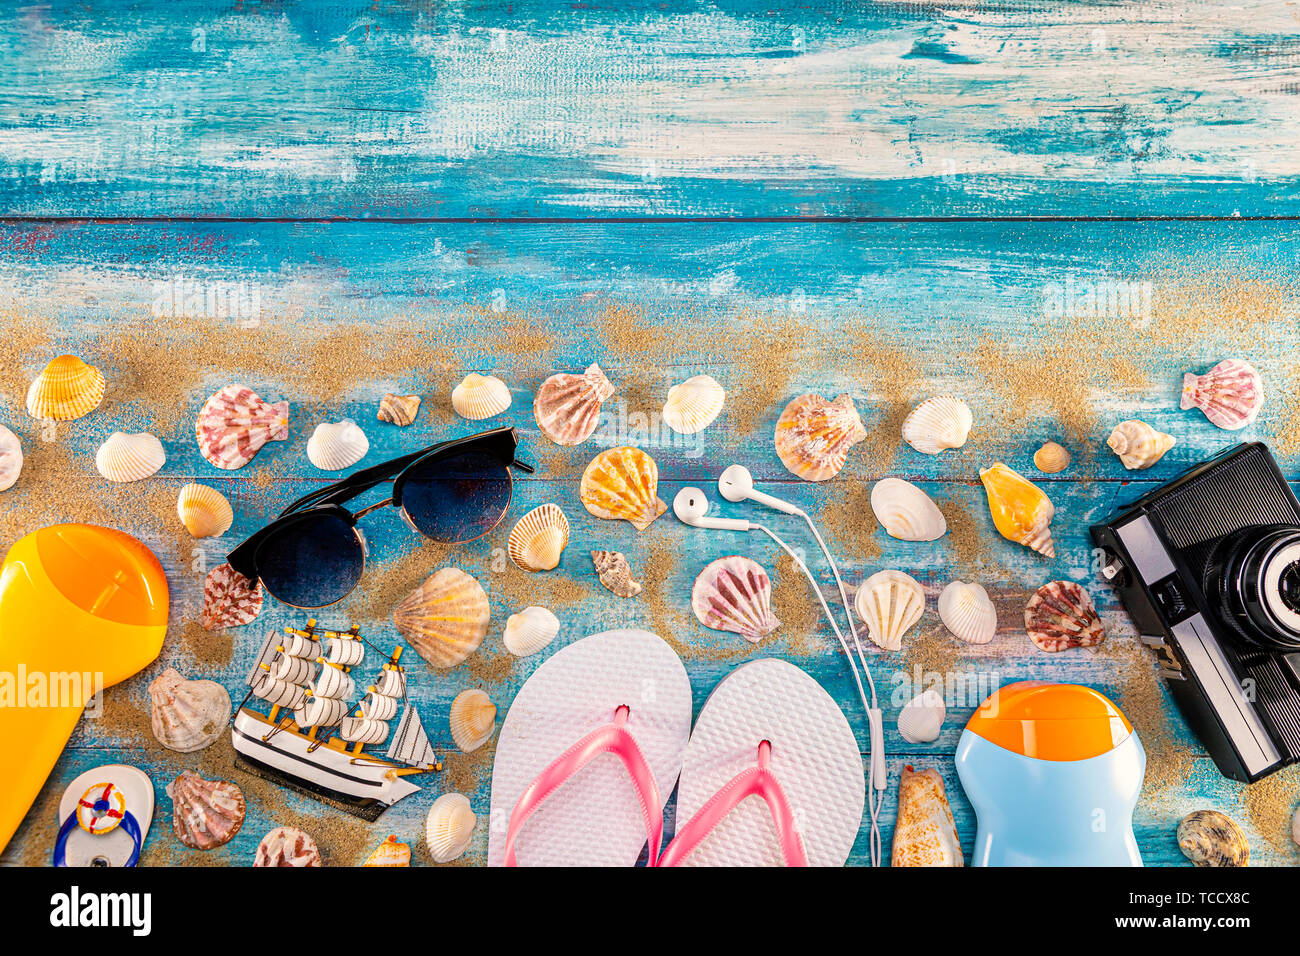 Beach accessories retro film camera sunglasses flip flop and sea shell on wooden. Top view of beach accessories on blue plank summer holiday banner tr Stock Photo